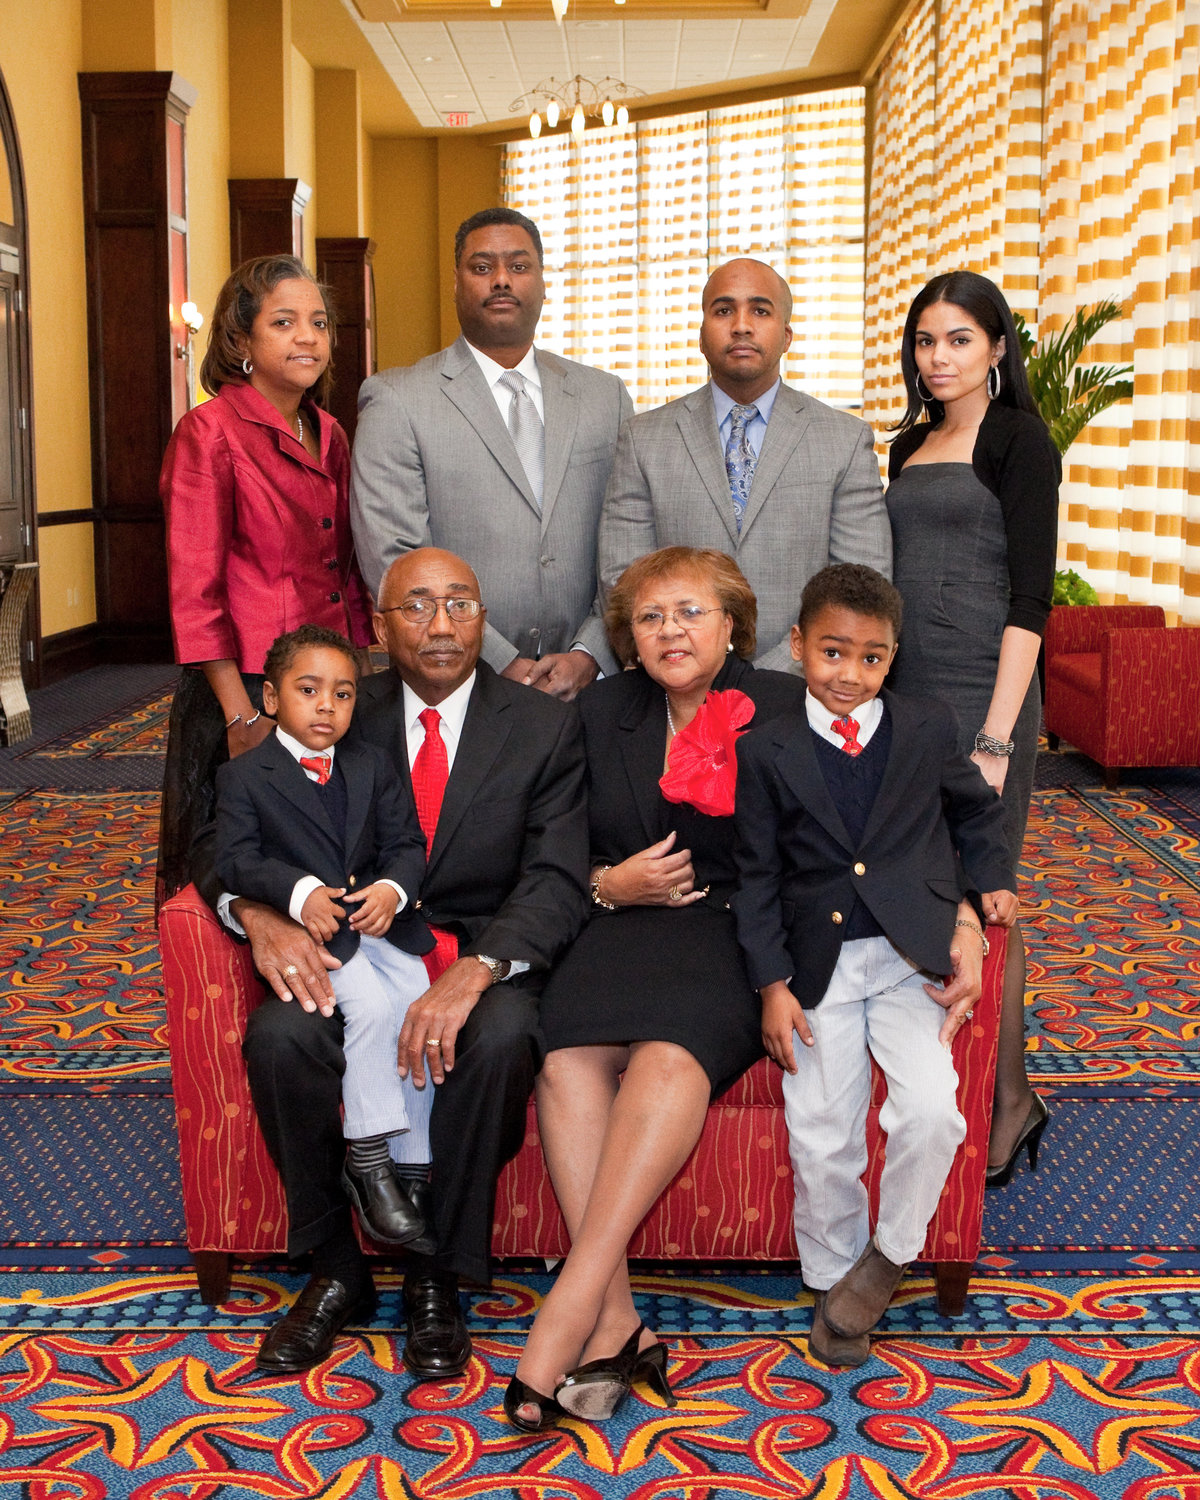 Family photo session at the Riverview Plaza hotel in Mobile, Alabama.